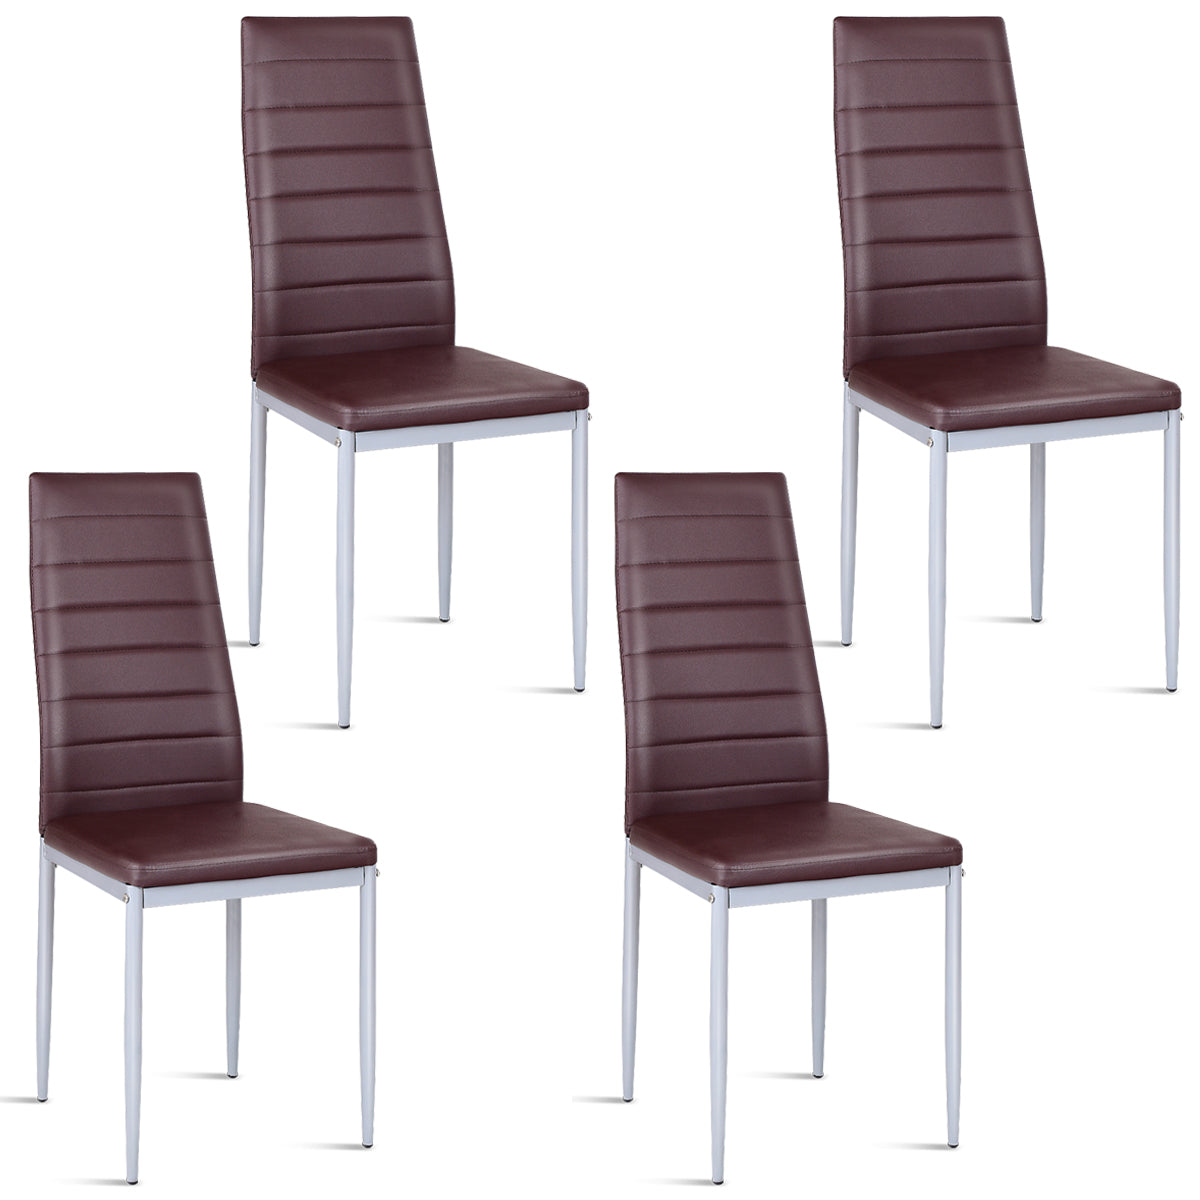 Giantex Set of 4 PU Leather Dining Side Chairs with Padded Seat Foot Cap